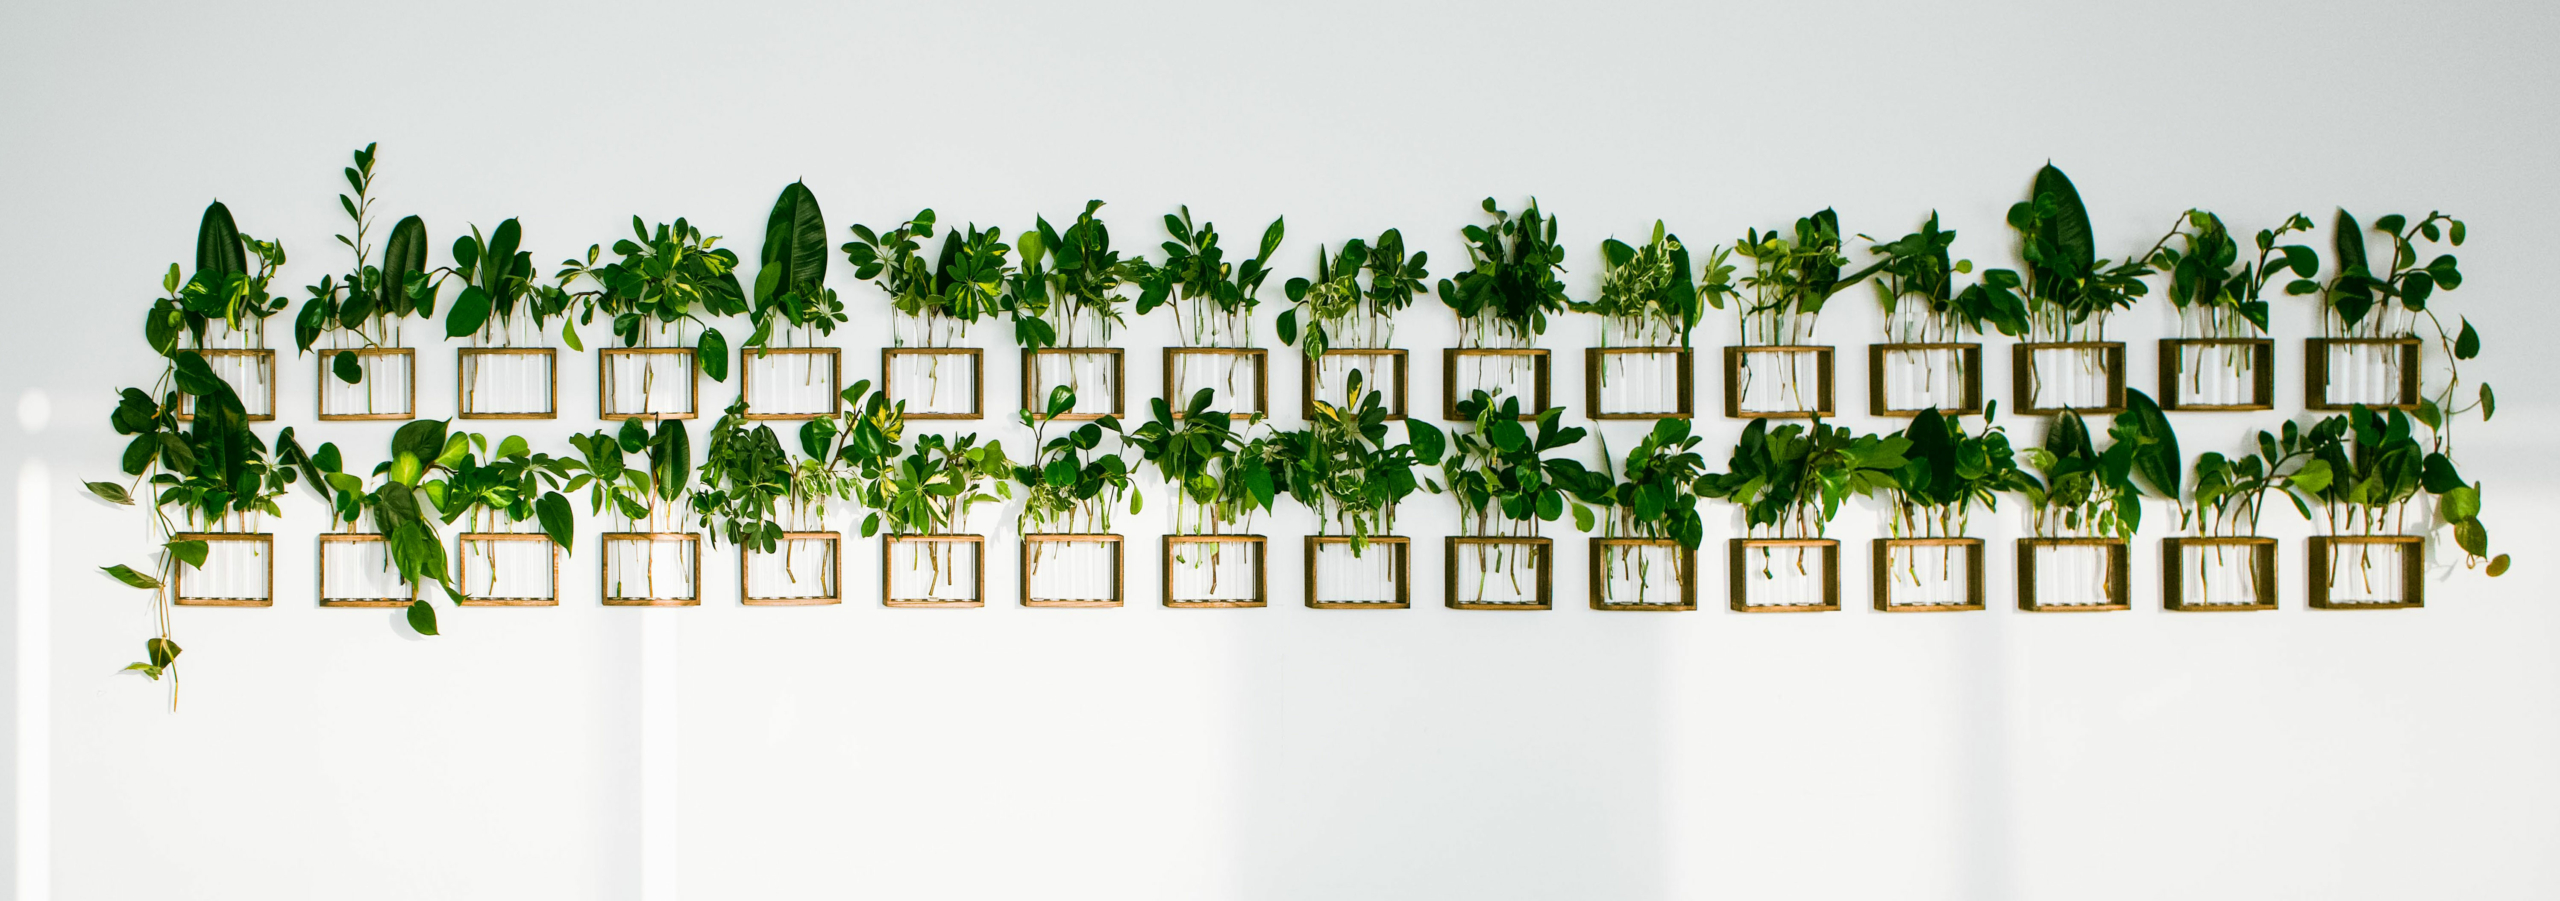 Plant Growing Wall by Wander Pot - Banner